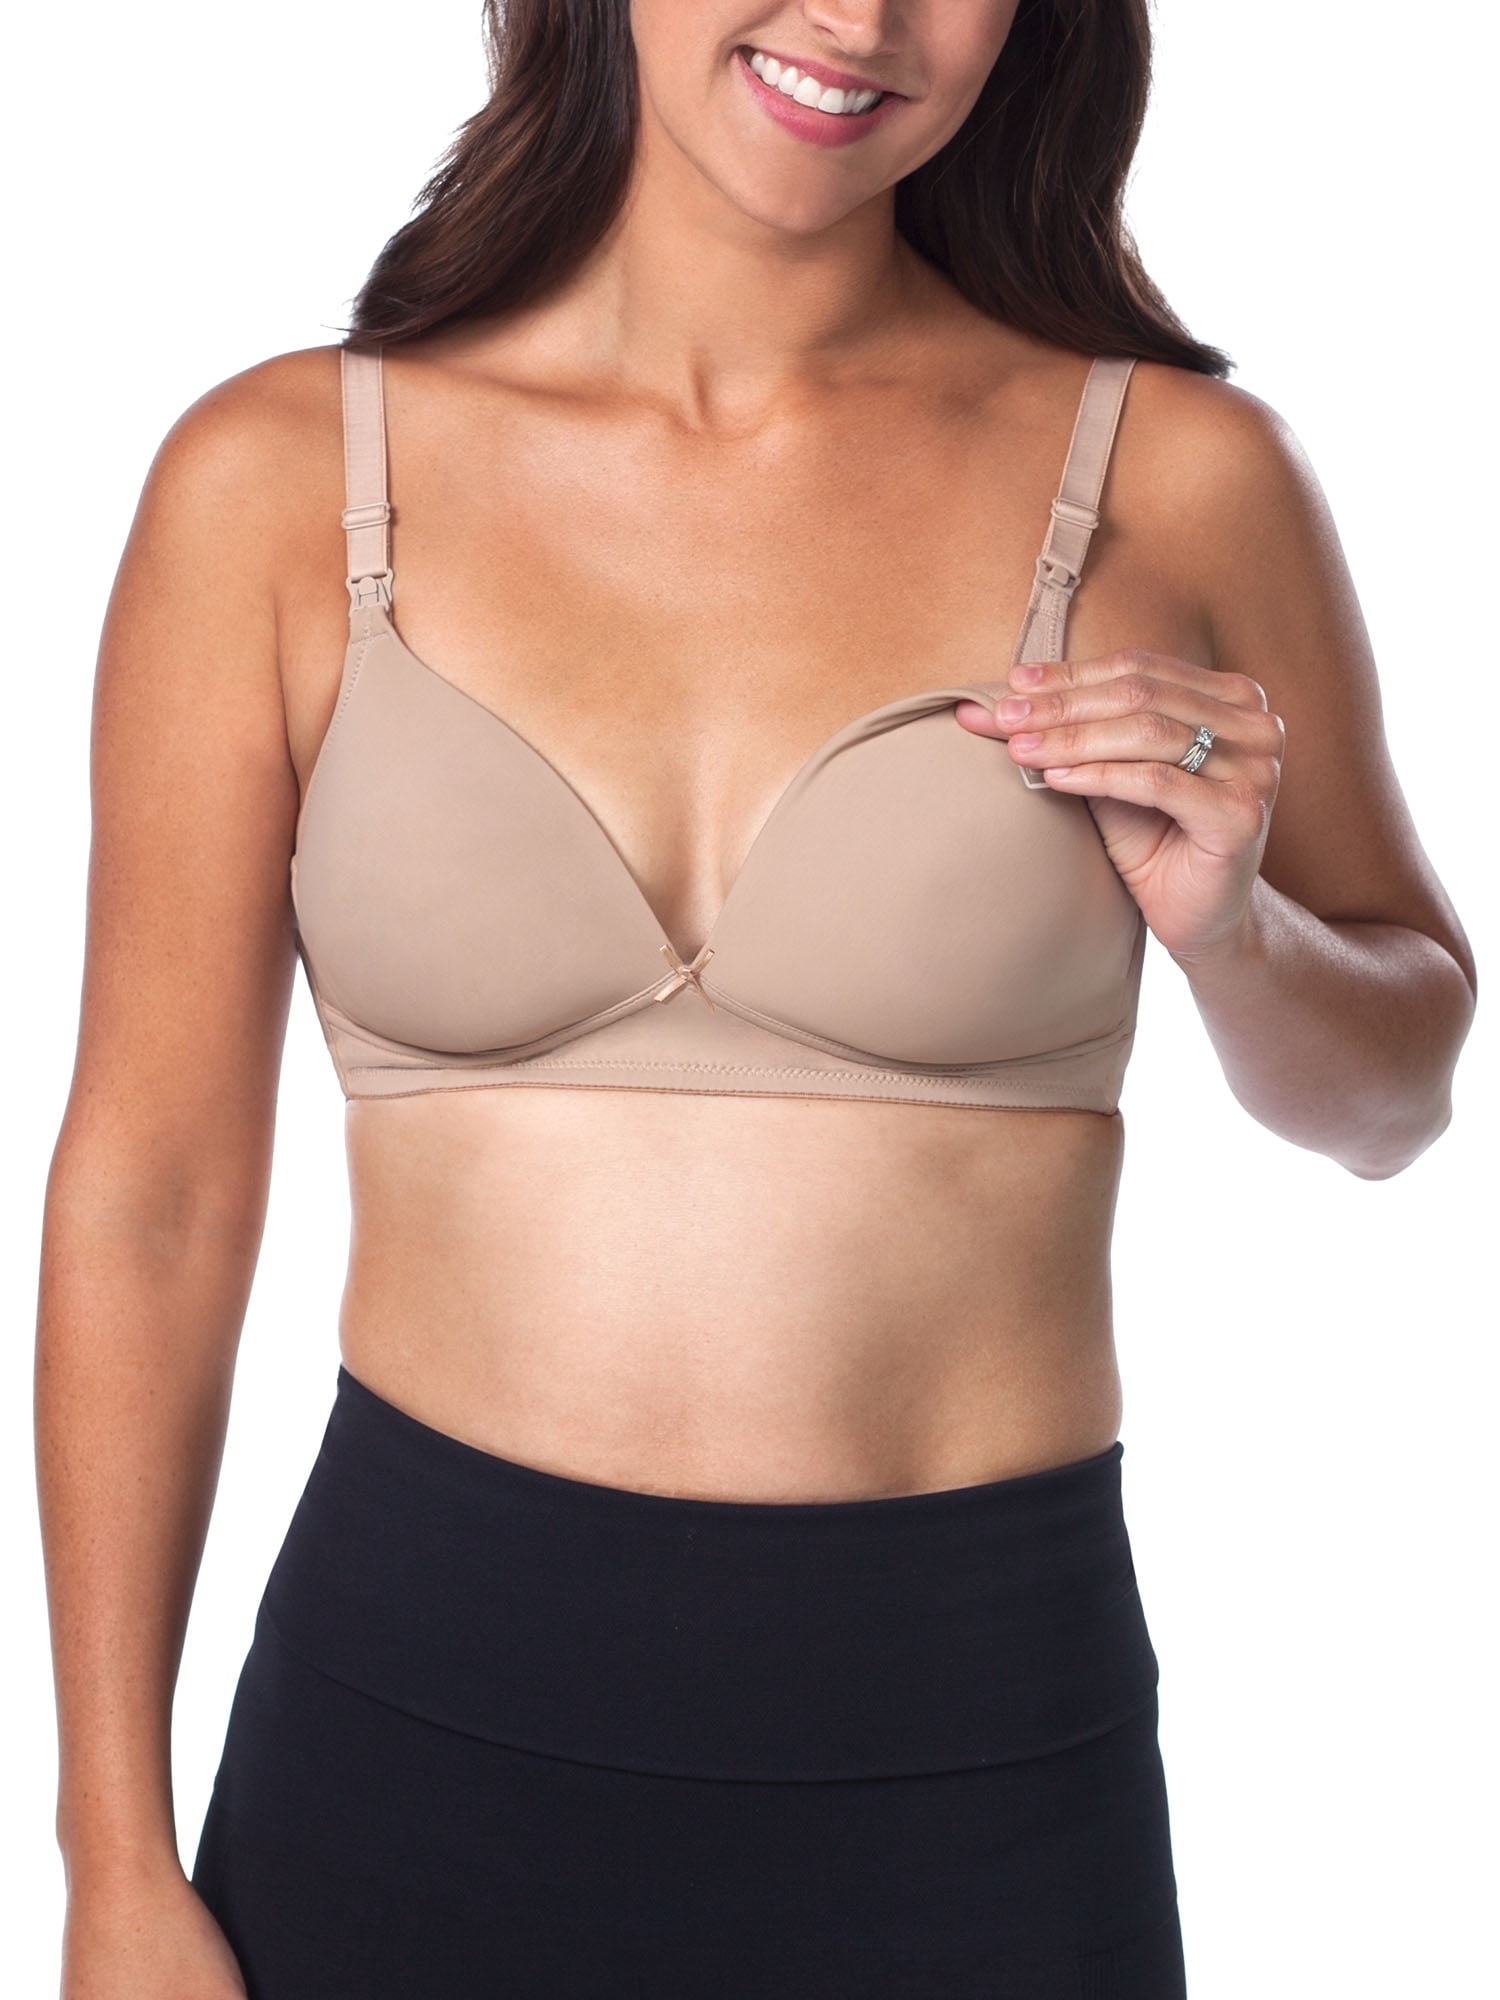 Momcozy Bra — a revolution in comfort and support for all you